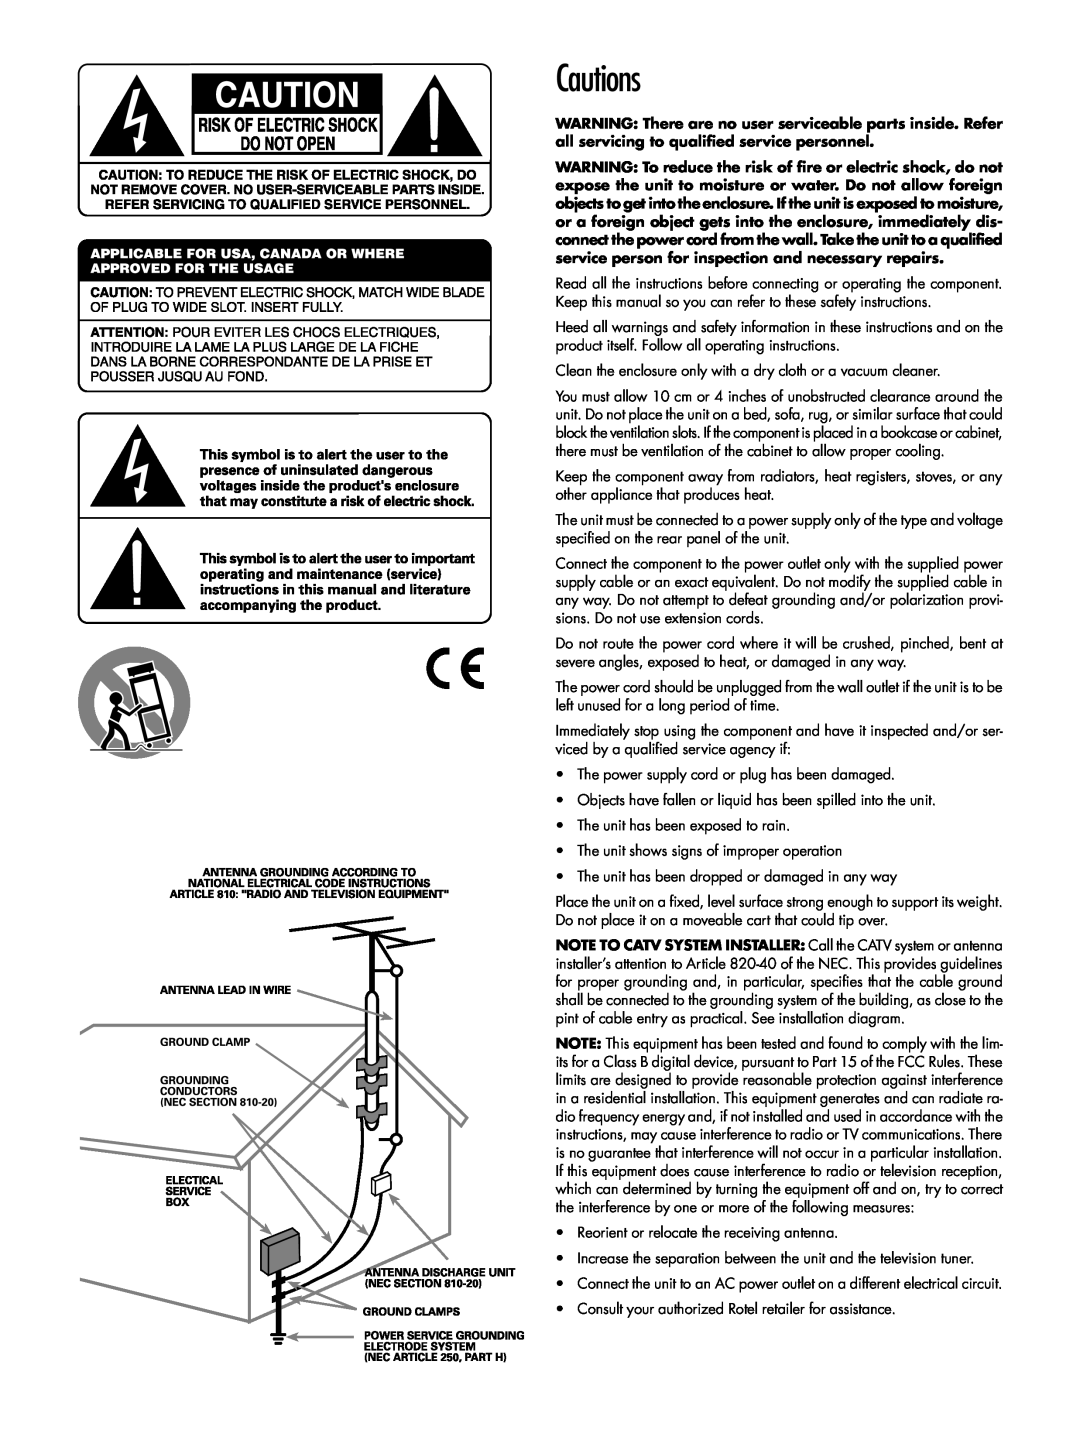 Rotel RT-1080 owner manual Cautions 